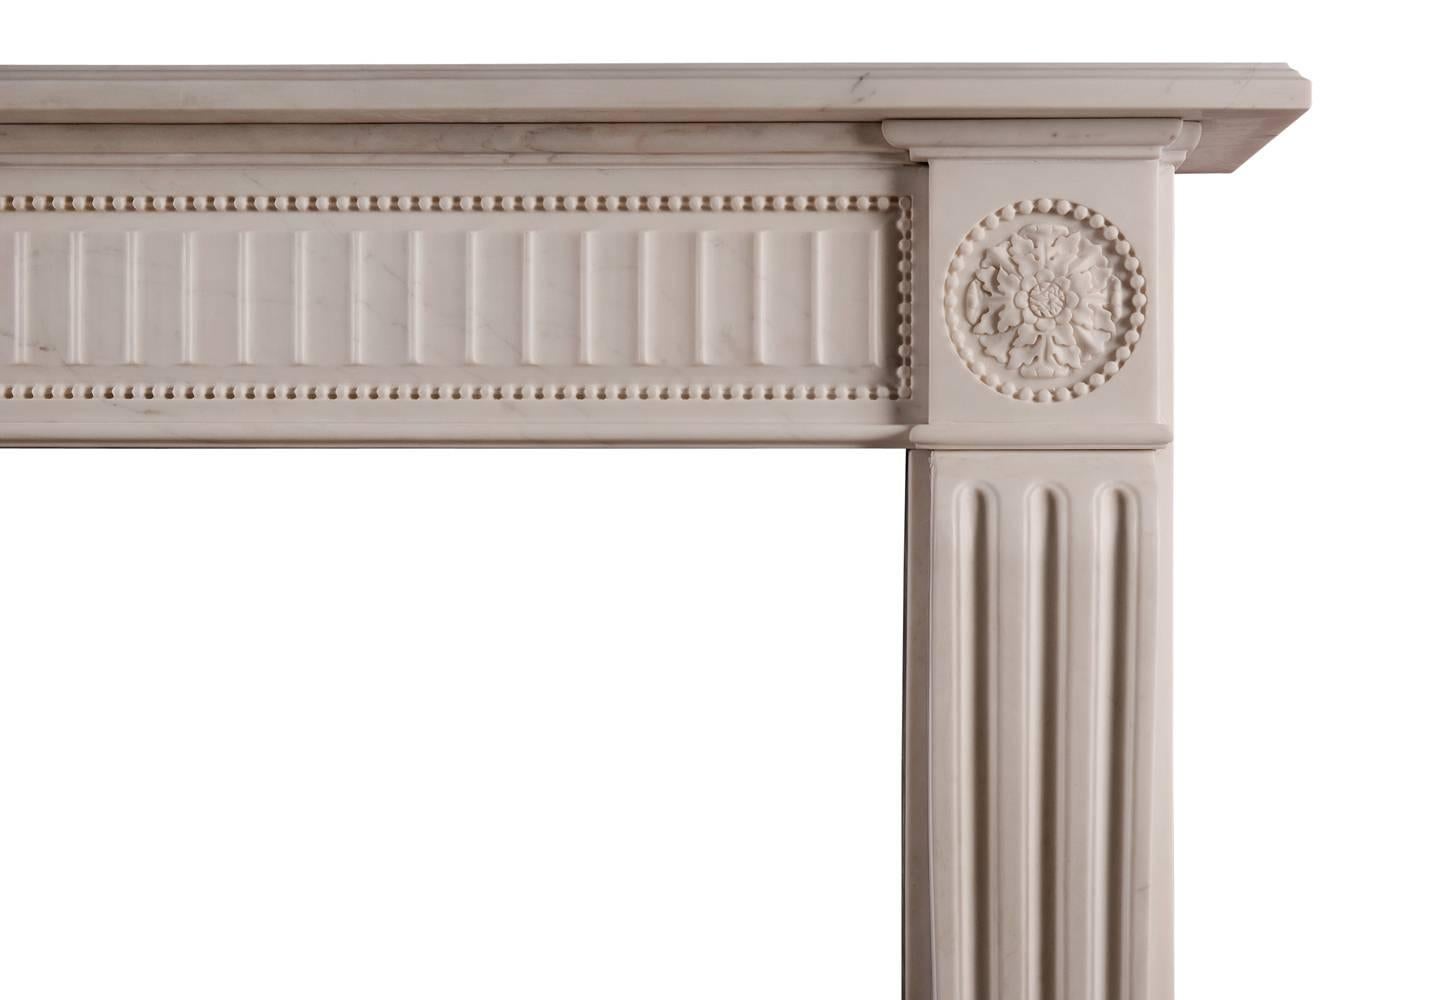 An English white marble fireplace in the Regency style. The fluted panelled frieze bordered by beads, shaped fluted jambs surmounted by carved round paterae and beading. A quality copy of an original piece.

Measures:
Shelf width -             1605